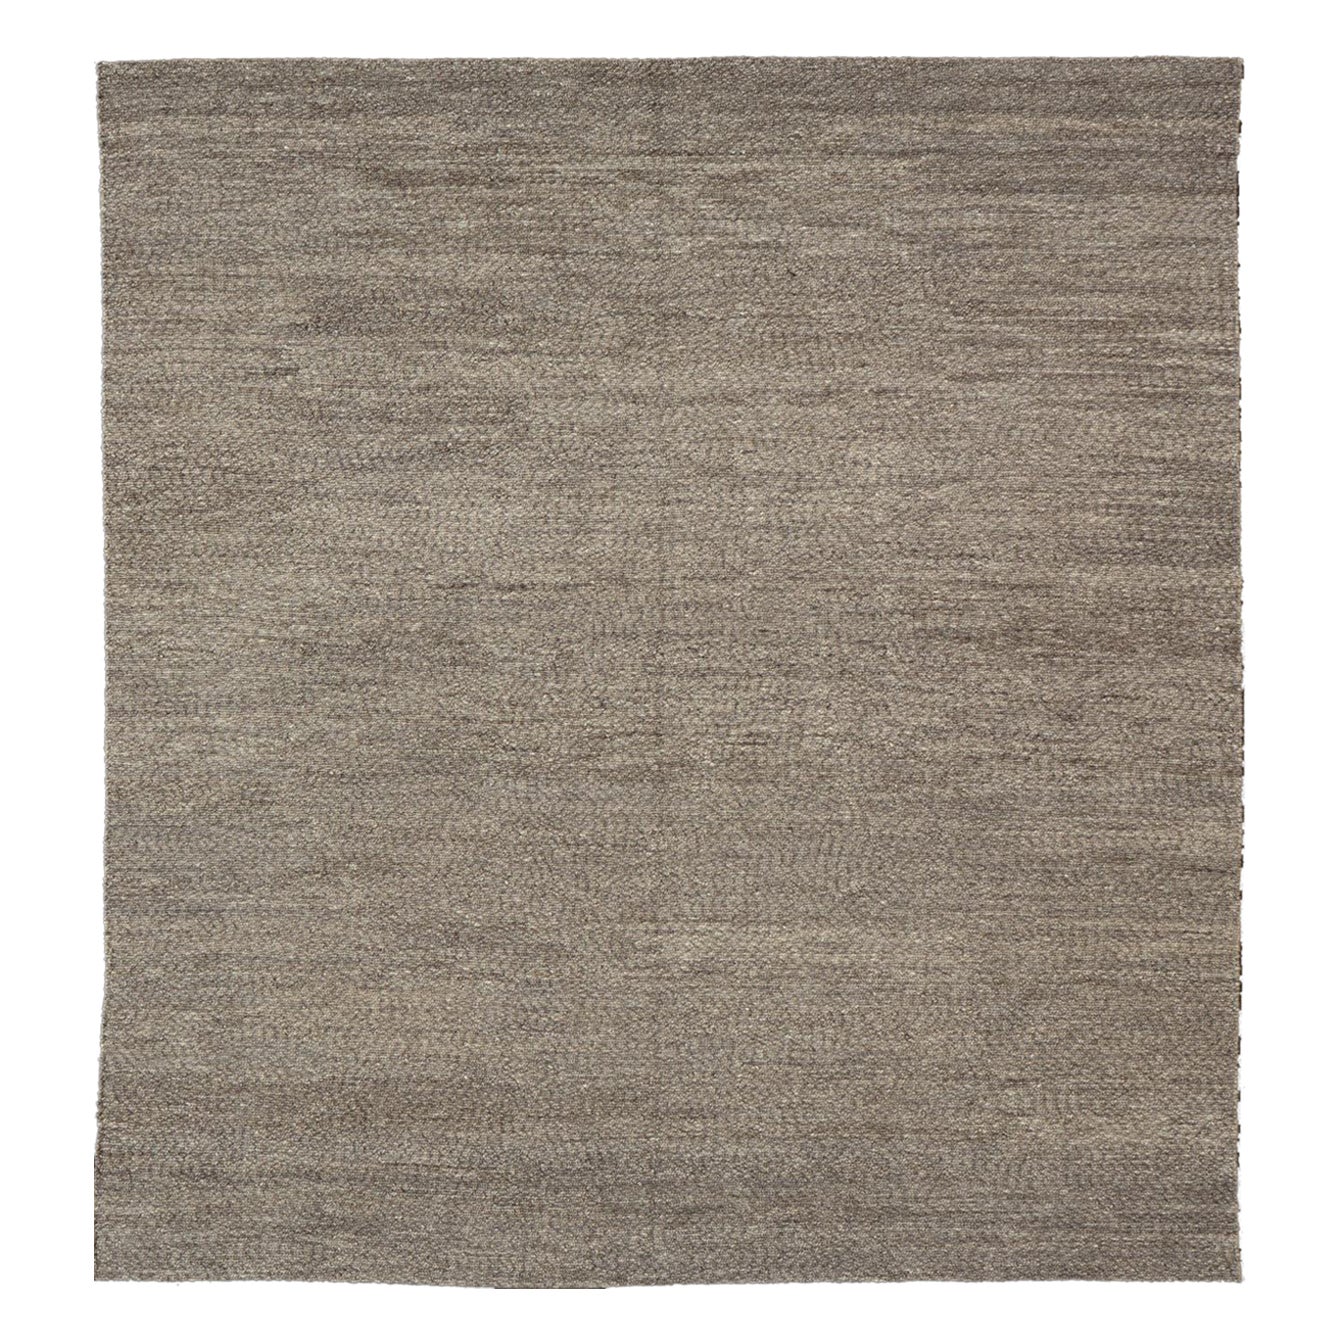 Square Size Large Modern Double Sided Sumack Flat Weave Rug With Thick Body For Sale